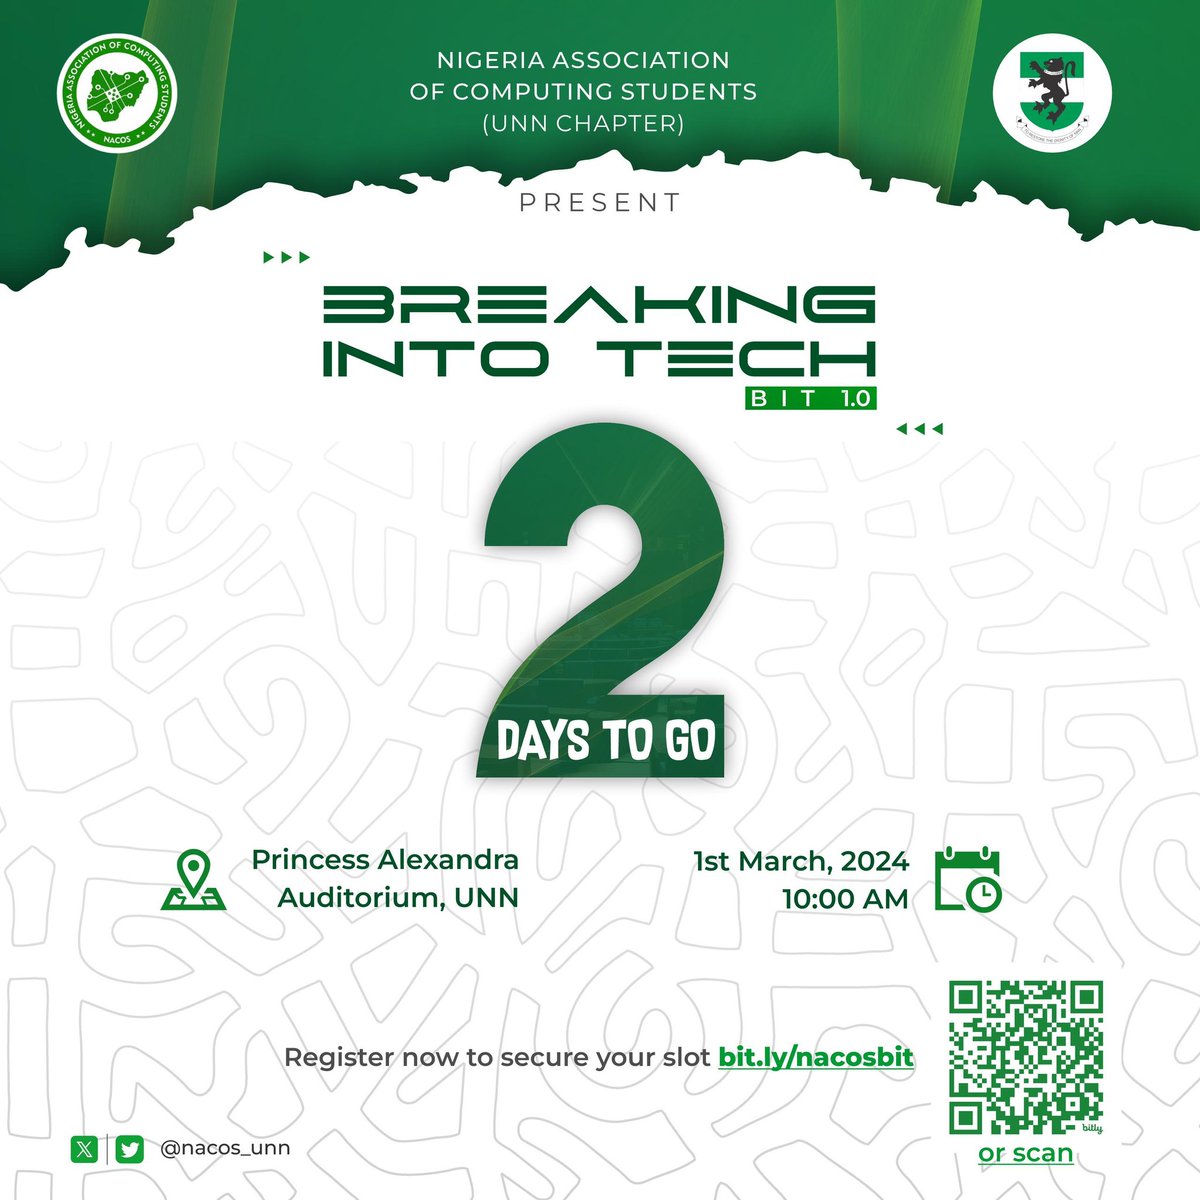 It's just two days left 🙈
Can't wait 🤭
Hope you've registered 😏
Register here now
bit.ly/nacosbit

#BIT1.0
#BreakingIntoTech
#NACOSUNN